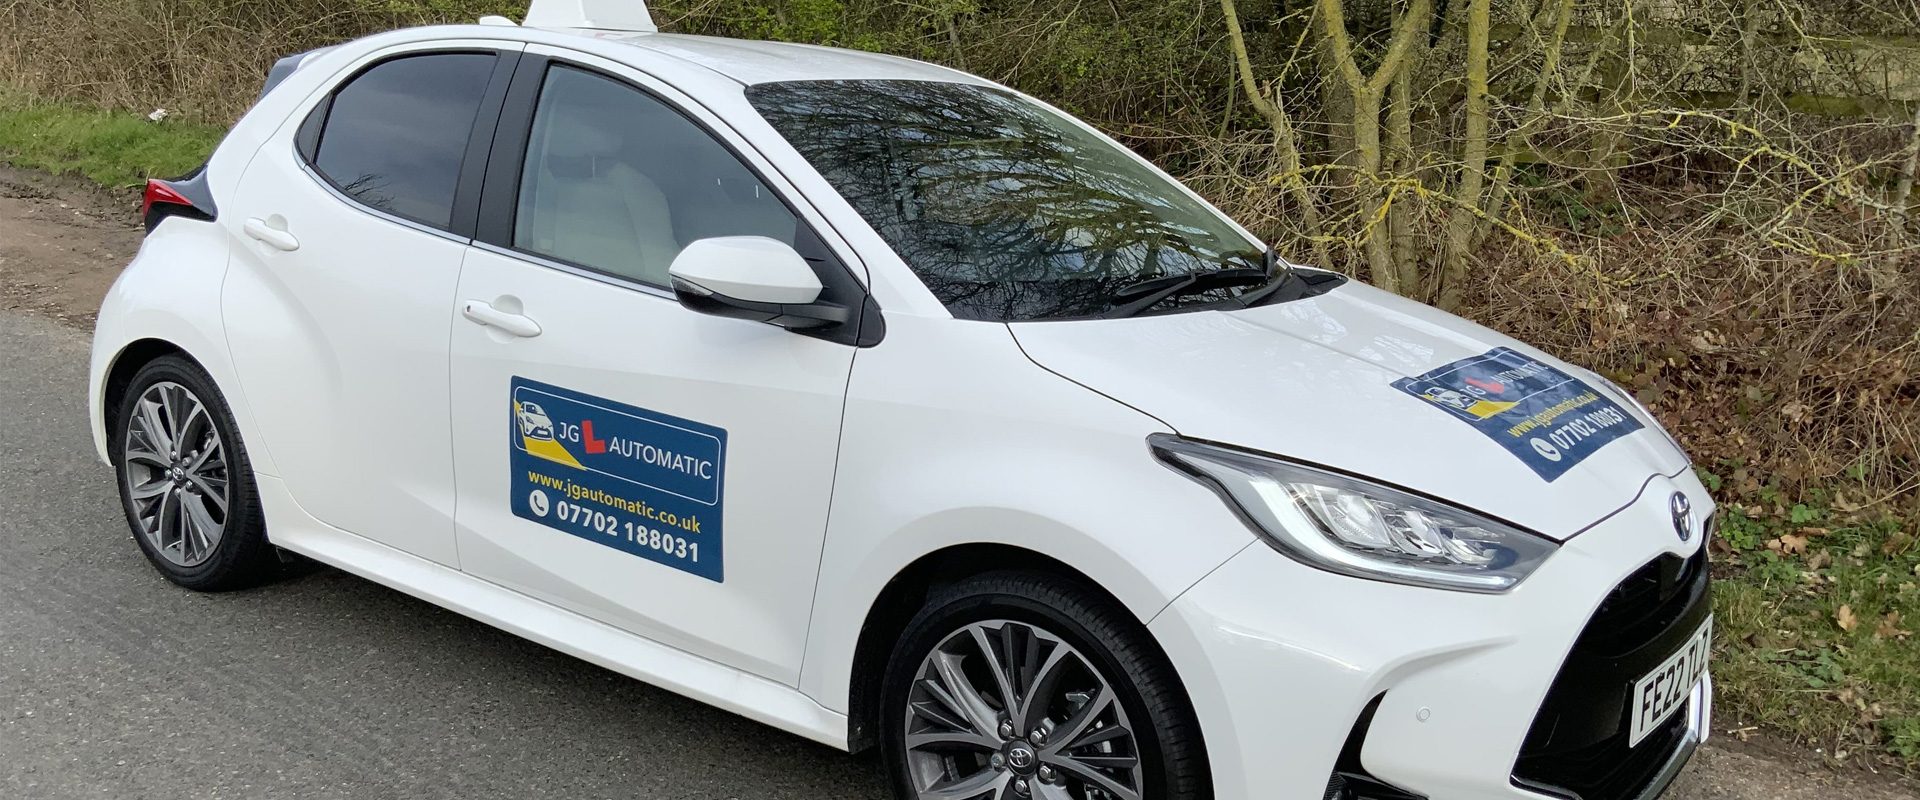 Auto Driving Instructor Worcester